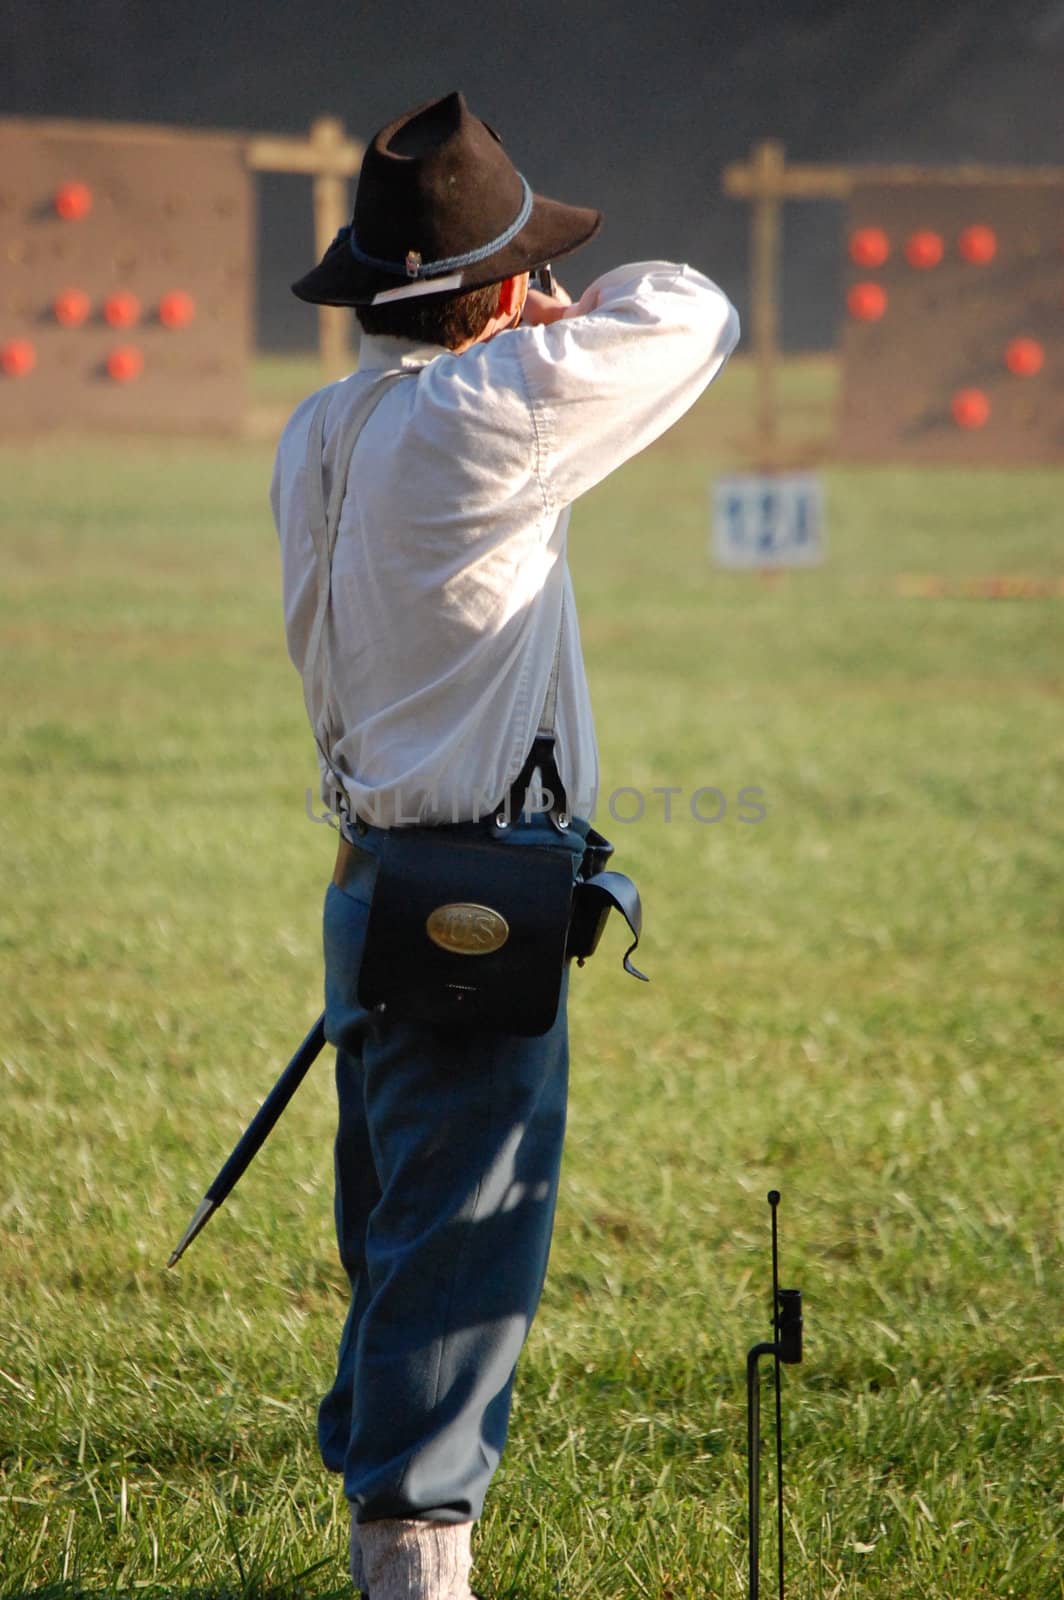 Man shoots at N-SSA National Skirmish by RefocusPhoto